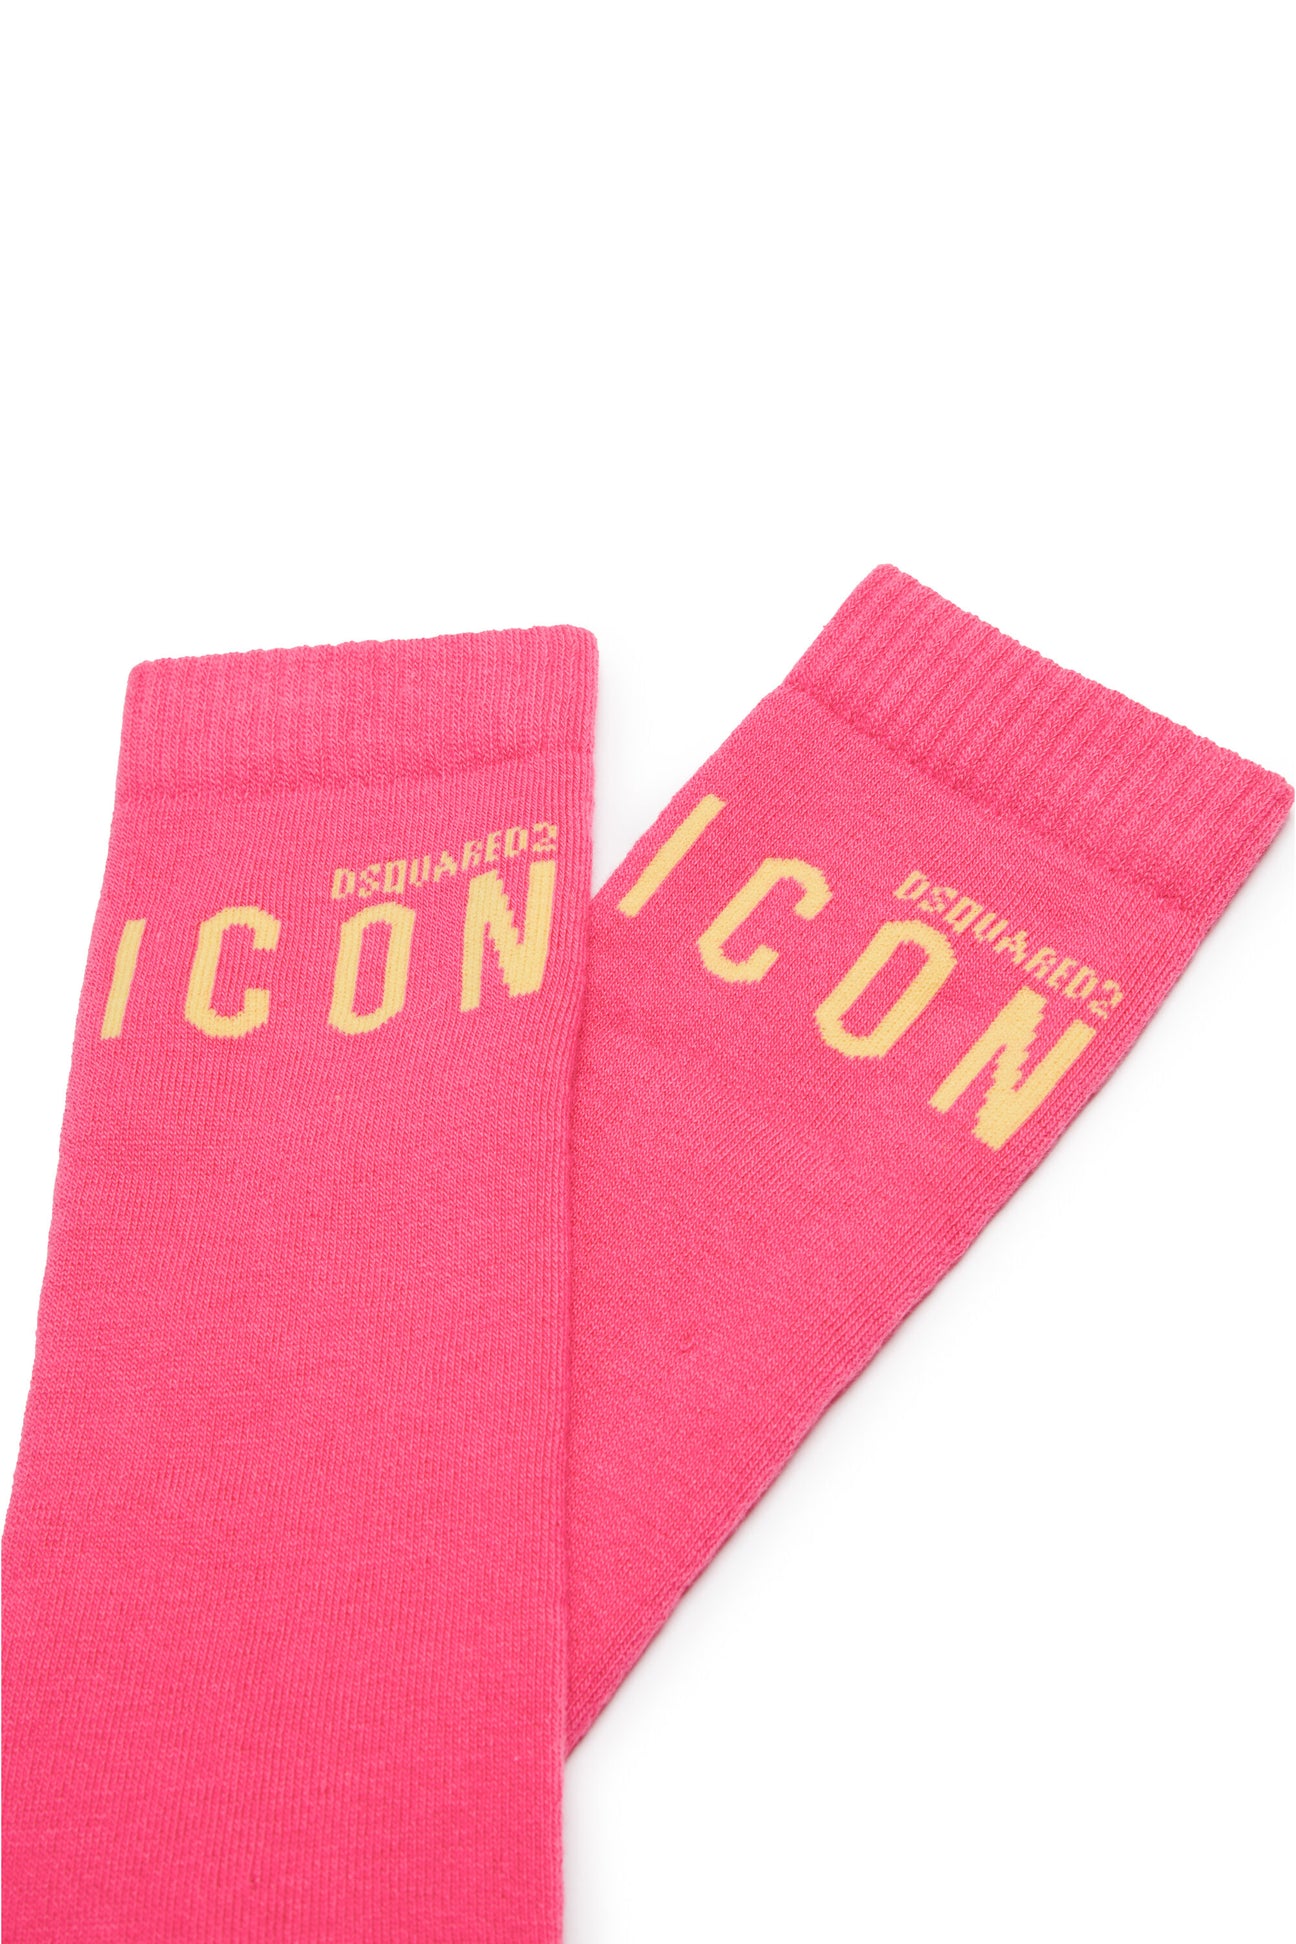 Cotton socks branded with ICON logo Cotton socks branded with ICON logo